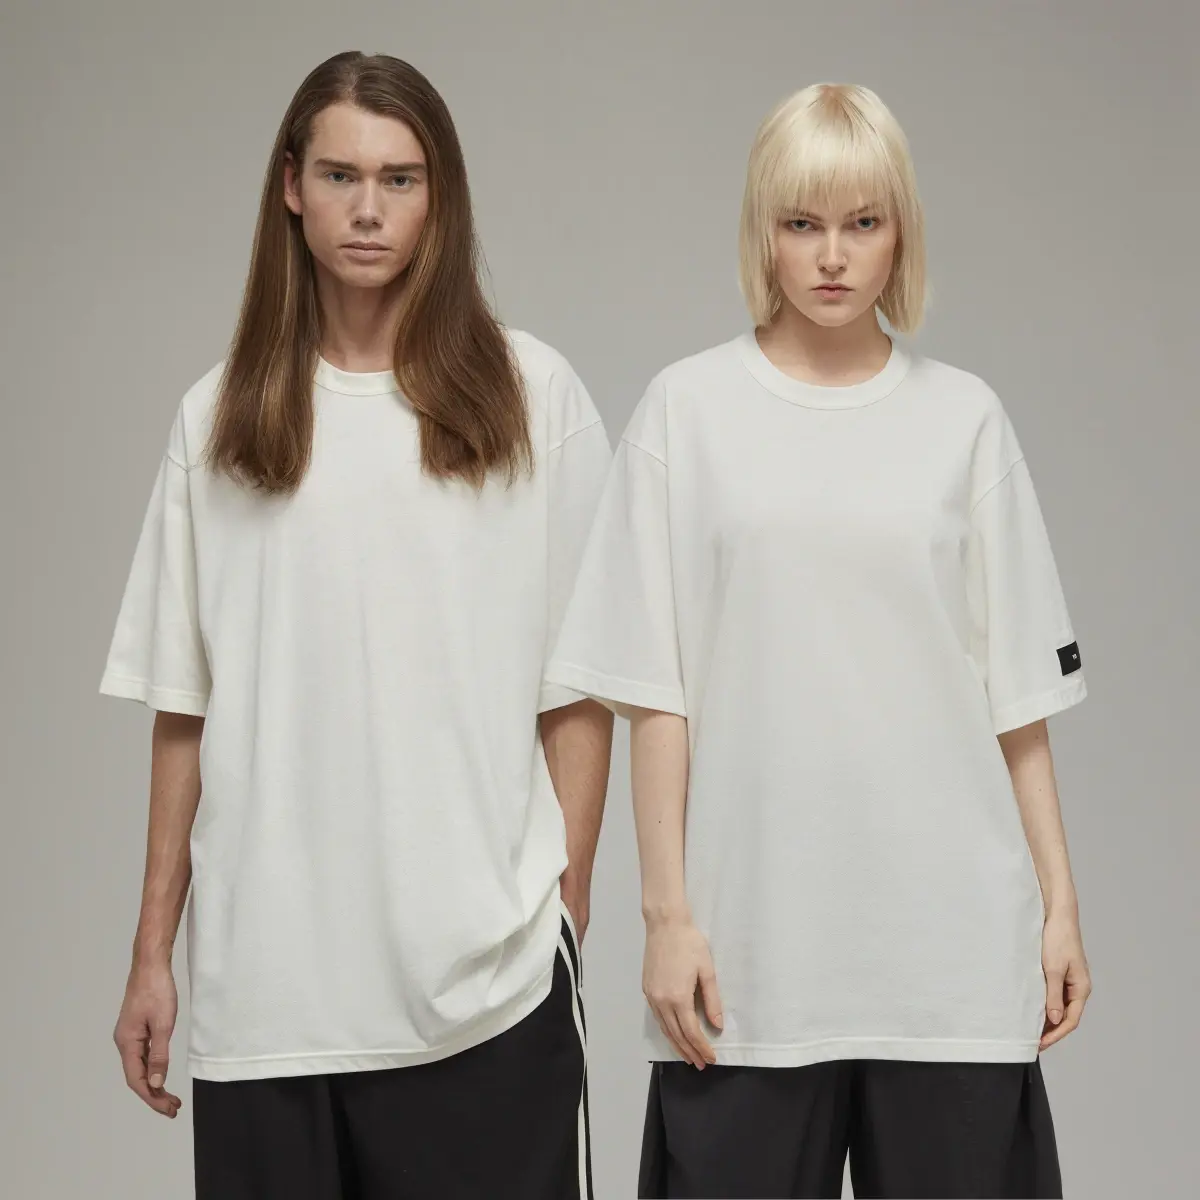 Adidas Y-3 Crepe Jersey T-Shirt. 1